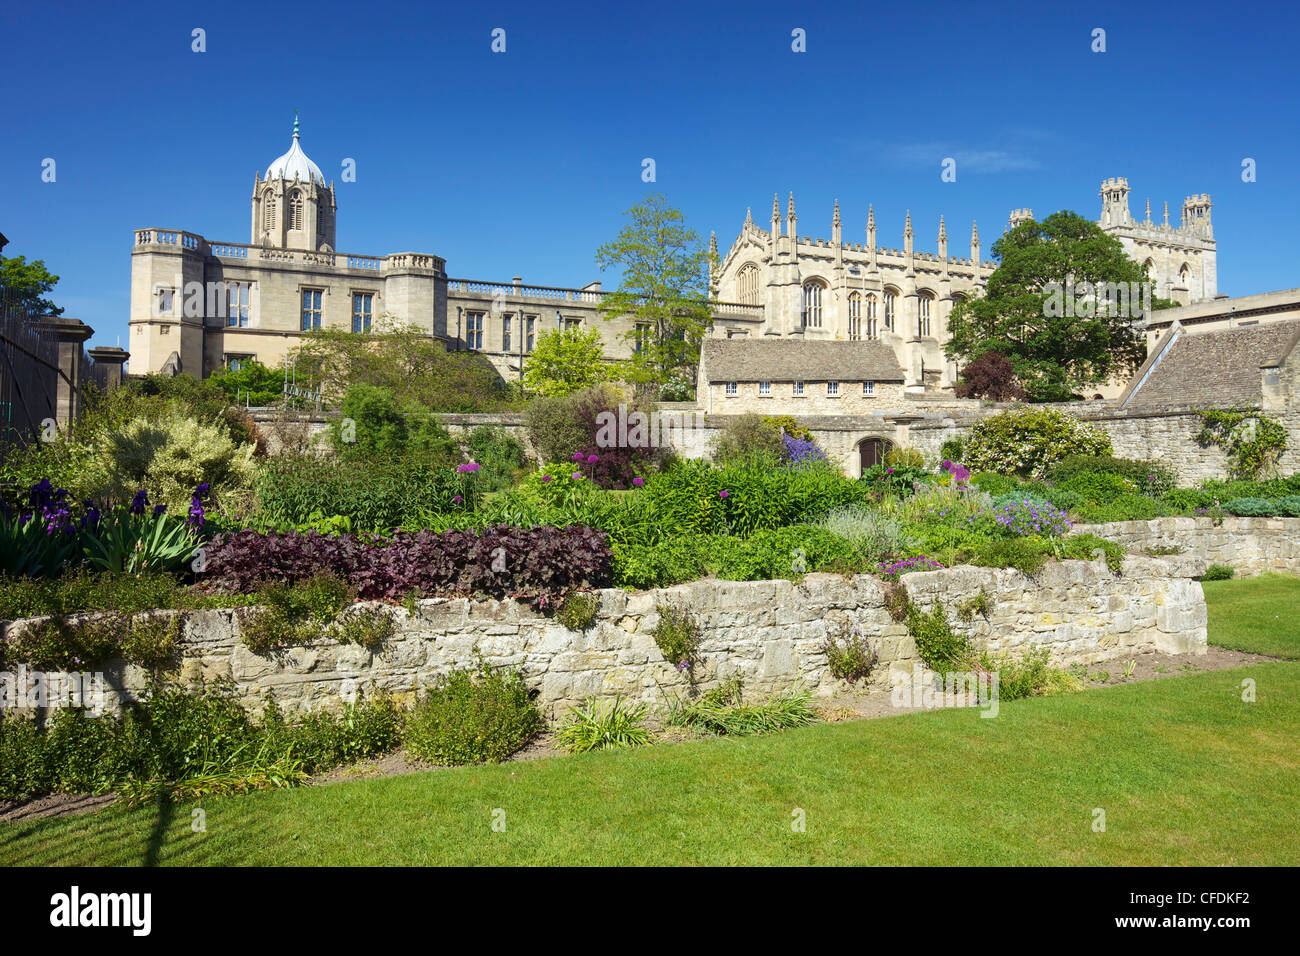 War Memorial Garden, Christ Church College, Oxford University, Oxford, Angleterre, Royaume-Uni, Europe Banque D'Images